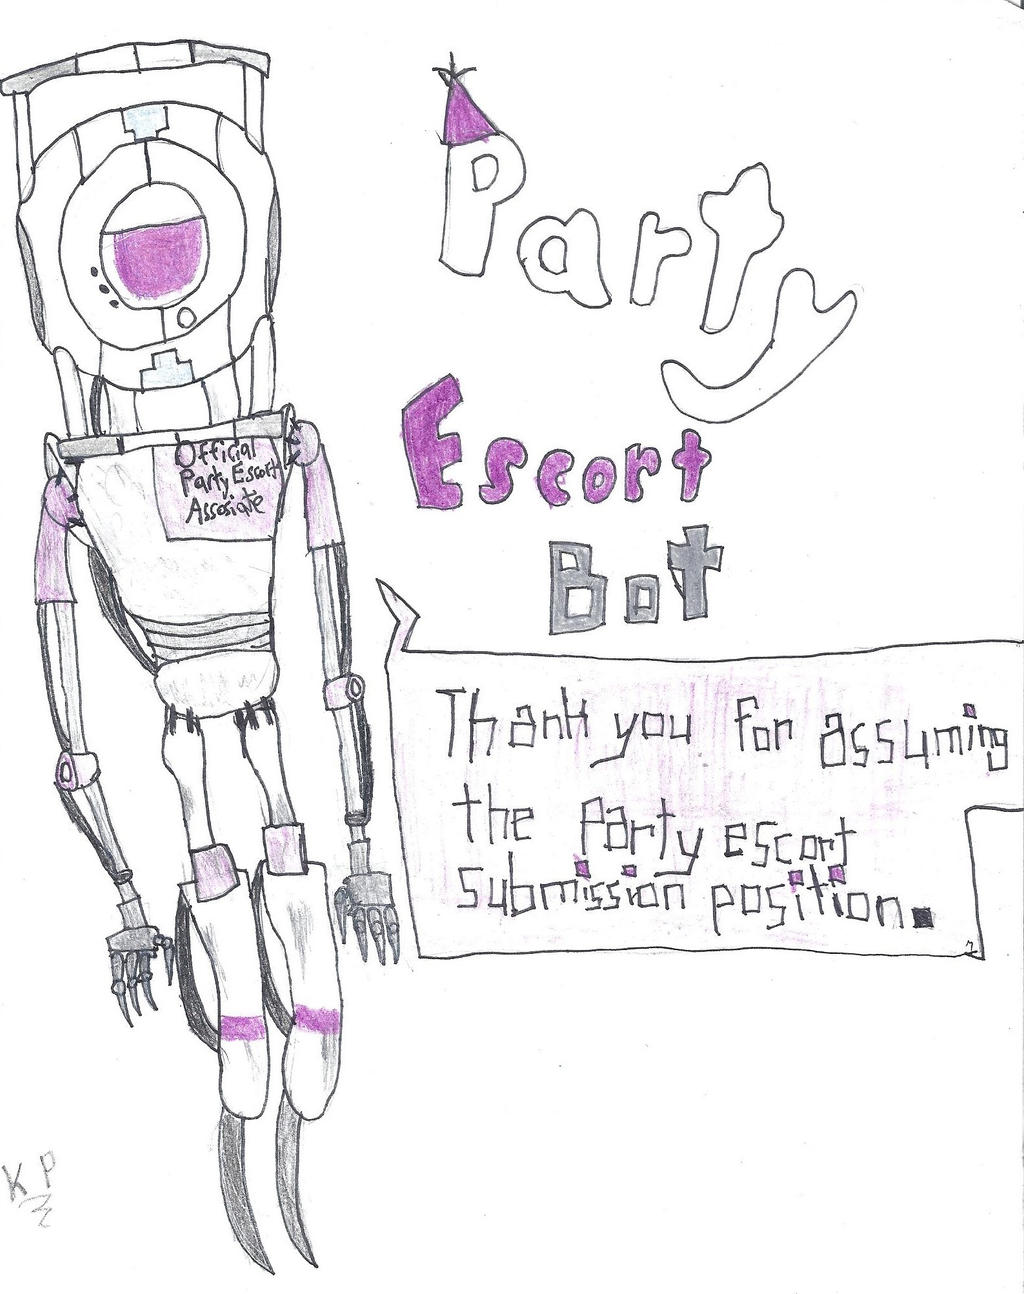 Bot party escort Small story